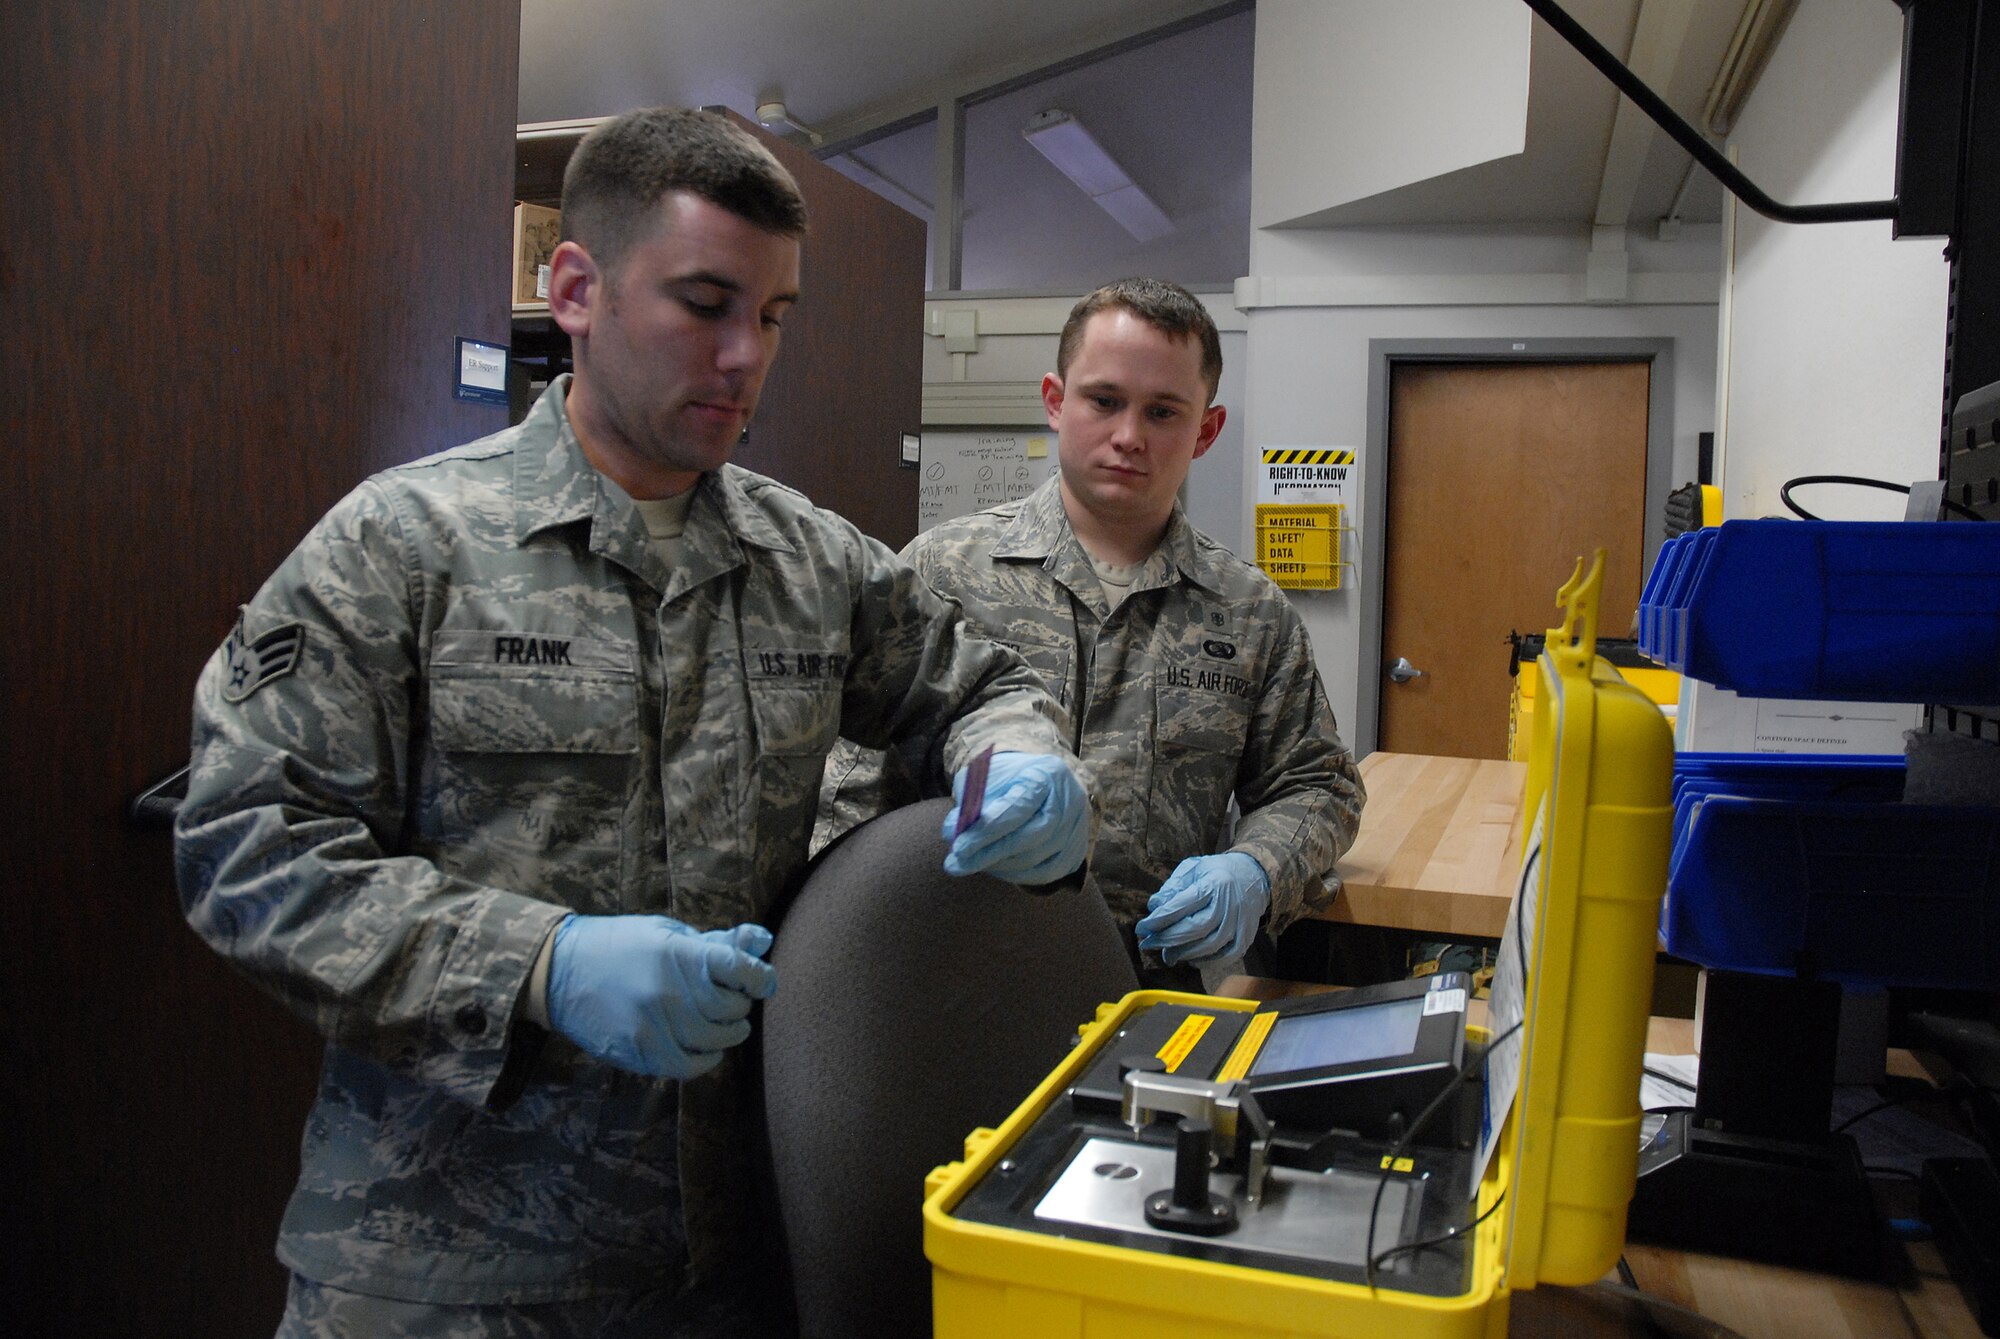 Senior Airman Rich Frank tests a package of beverage powder to demonstrate the identification capability of equipment at the Bioenvironmental building March 4. (U.S. Air Force photo/Staff Sgt. Dillon White)